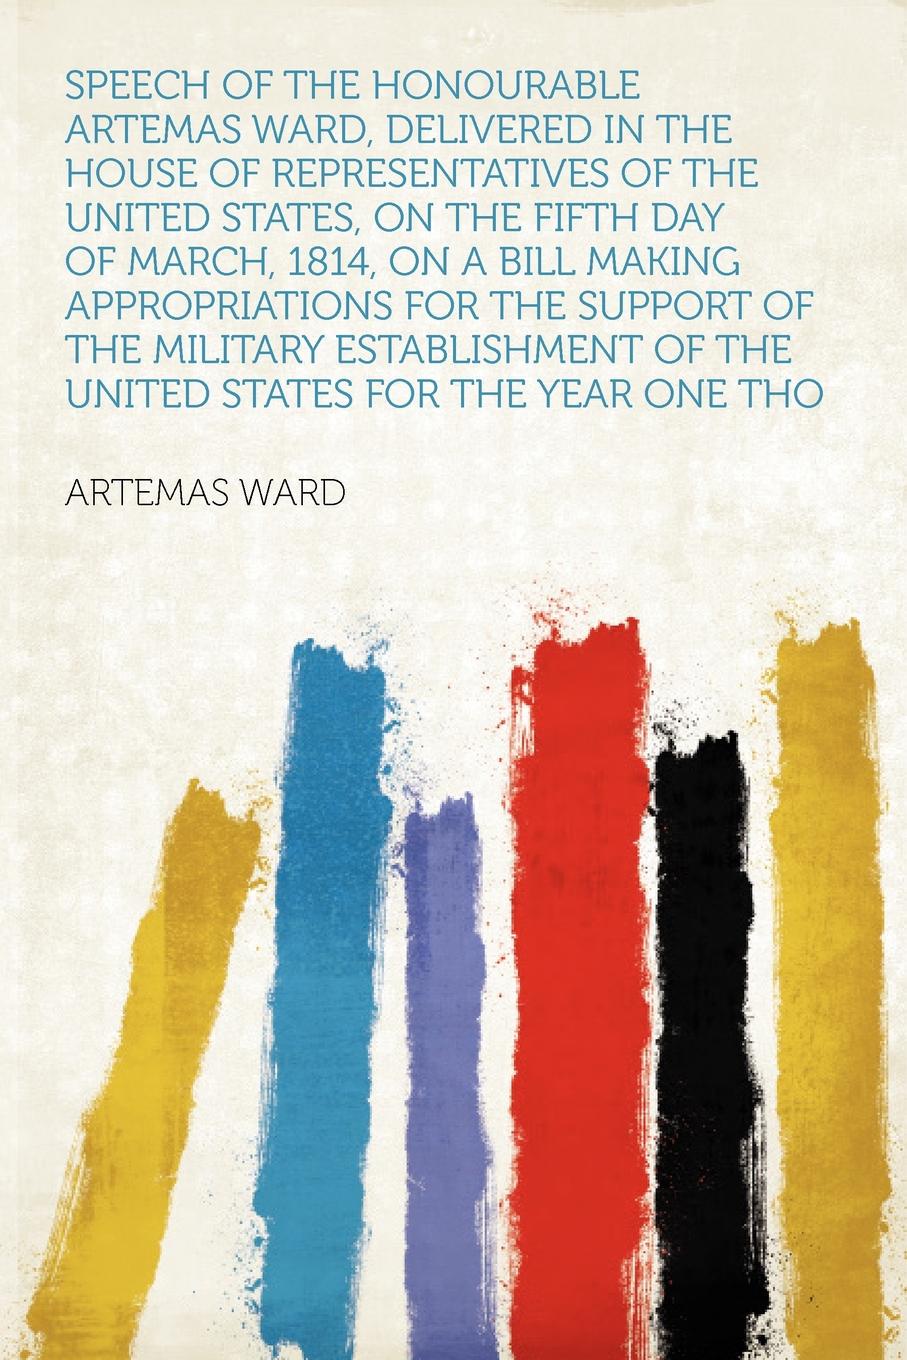 Speech of the Honourable Artemas Ward, Delivered in the House of Representatives of the United States, on the Fifth Day of March, 1814, on a Bill Making Appropriations for the Support of the Military Establishment of the United States for the Year...